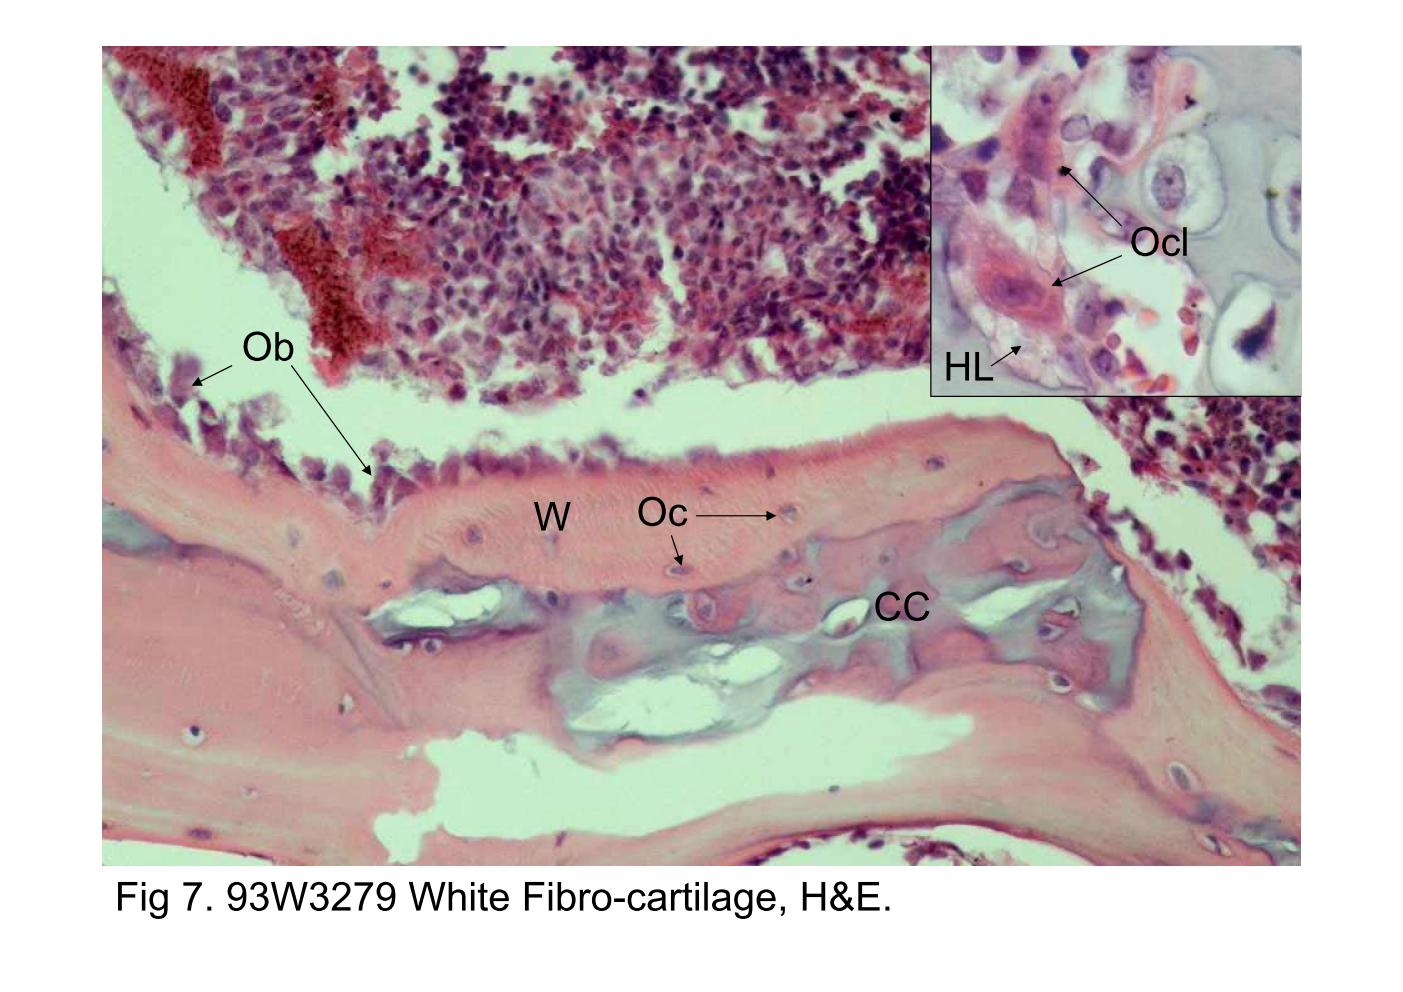 block6-1_17.jpg - Fig 7. 93W3279 White Fibro-cartilage, H&E.The blue-stained spicules of calcified cartilage (CC) aresurrounded by active osteoblasts (Ob) and newly formedwoven bone (W), which is stained pink. The osteocytes (Oc)are embedded in the bone matrix. The inset reveals two large,multinucleated osteoclasts (Ocl) and the underlying absorptivespace, Howship's lacunae (HL), is also identified.